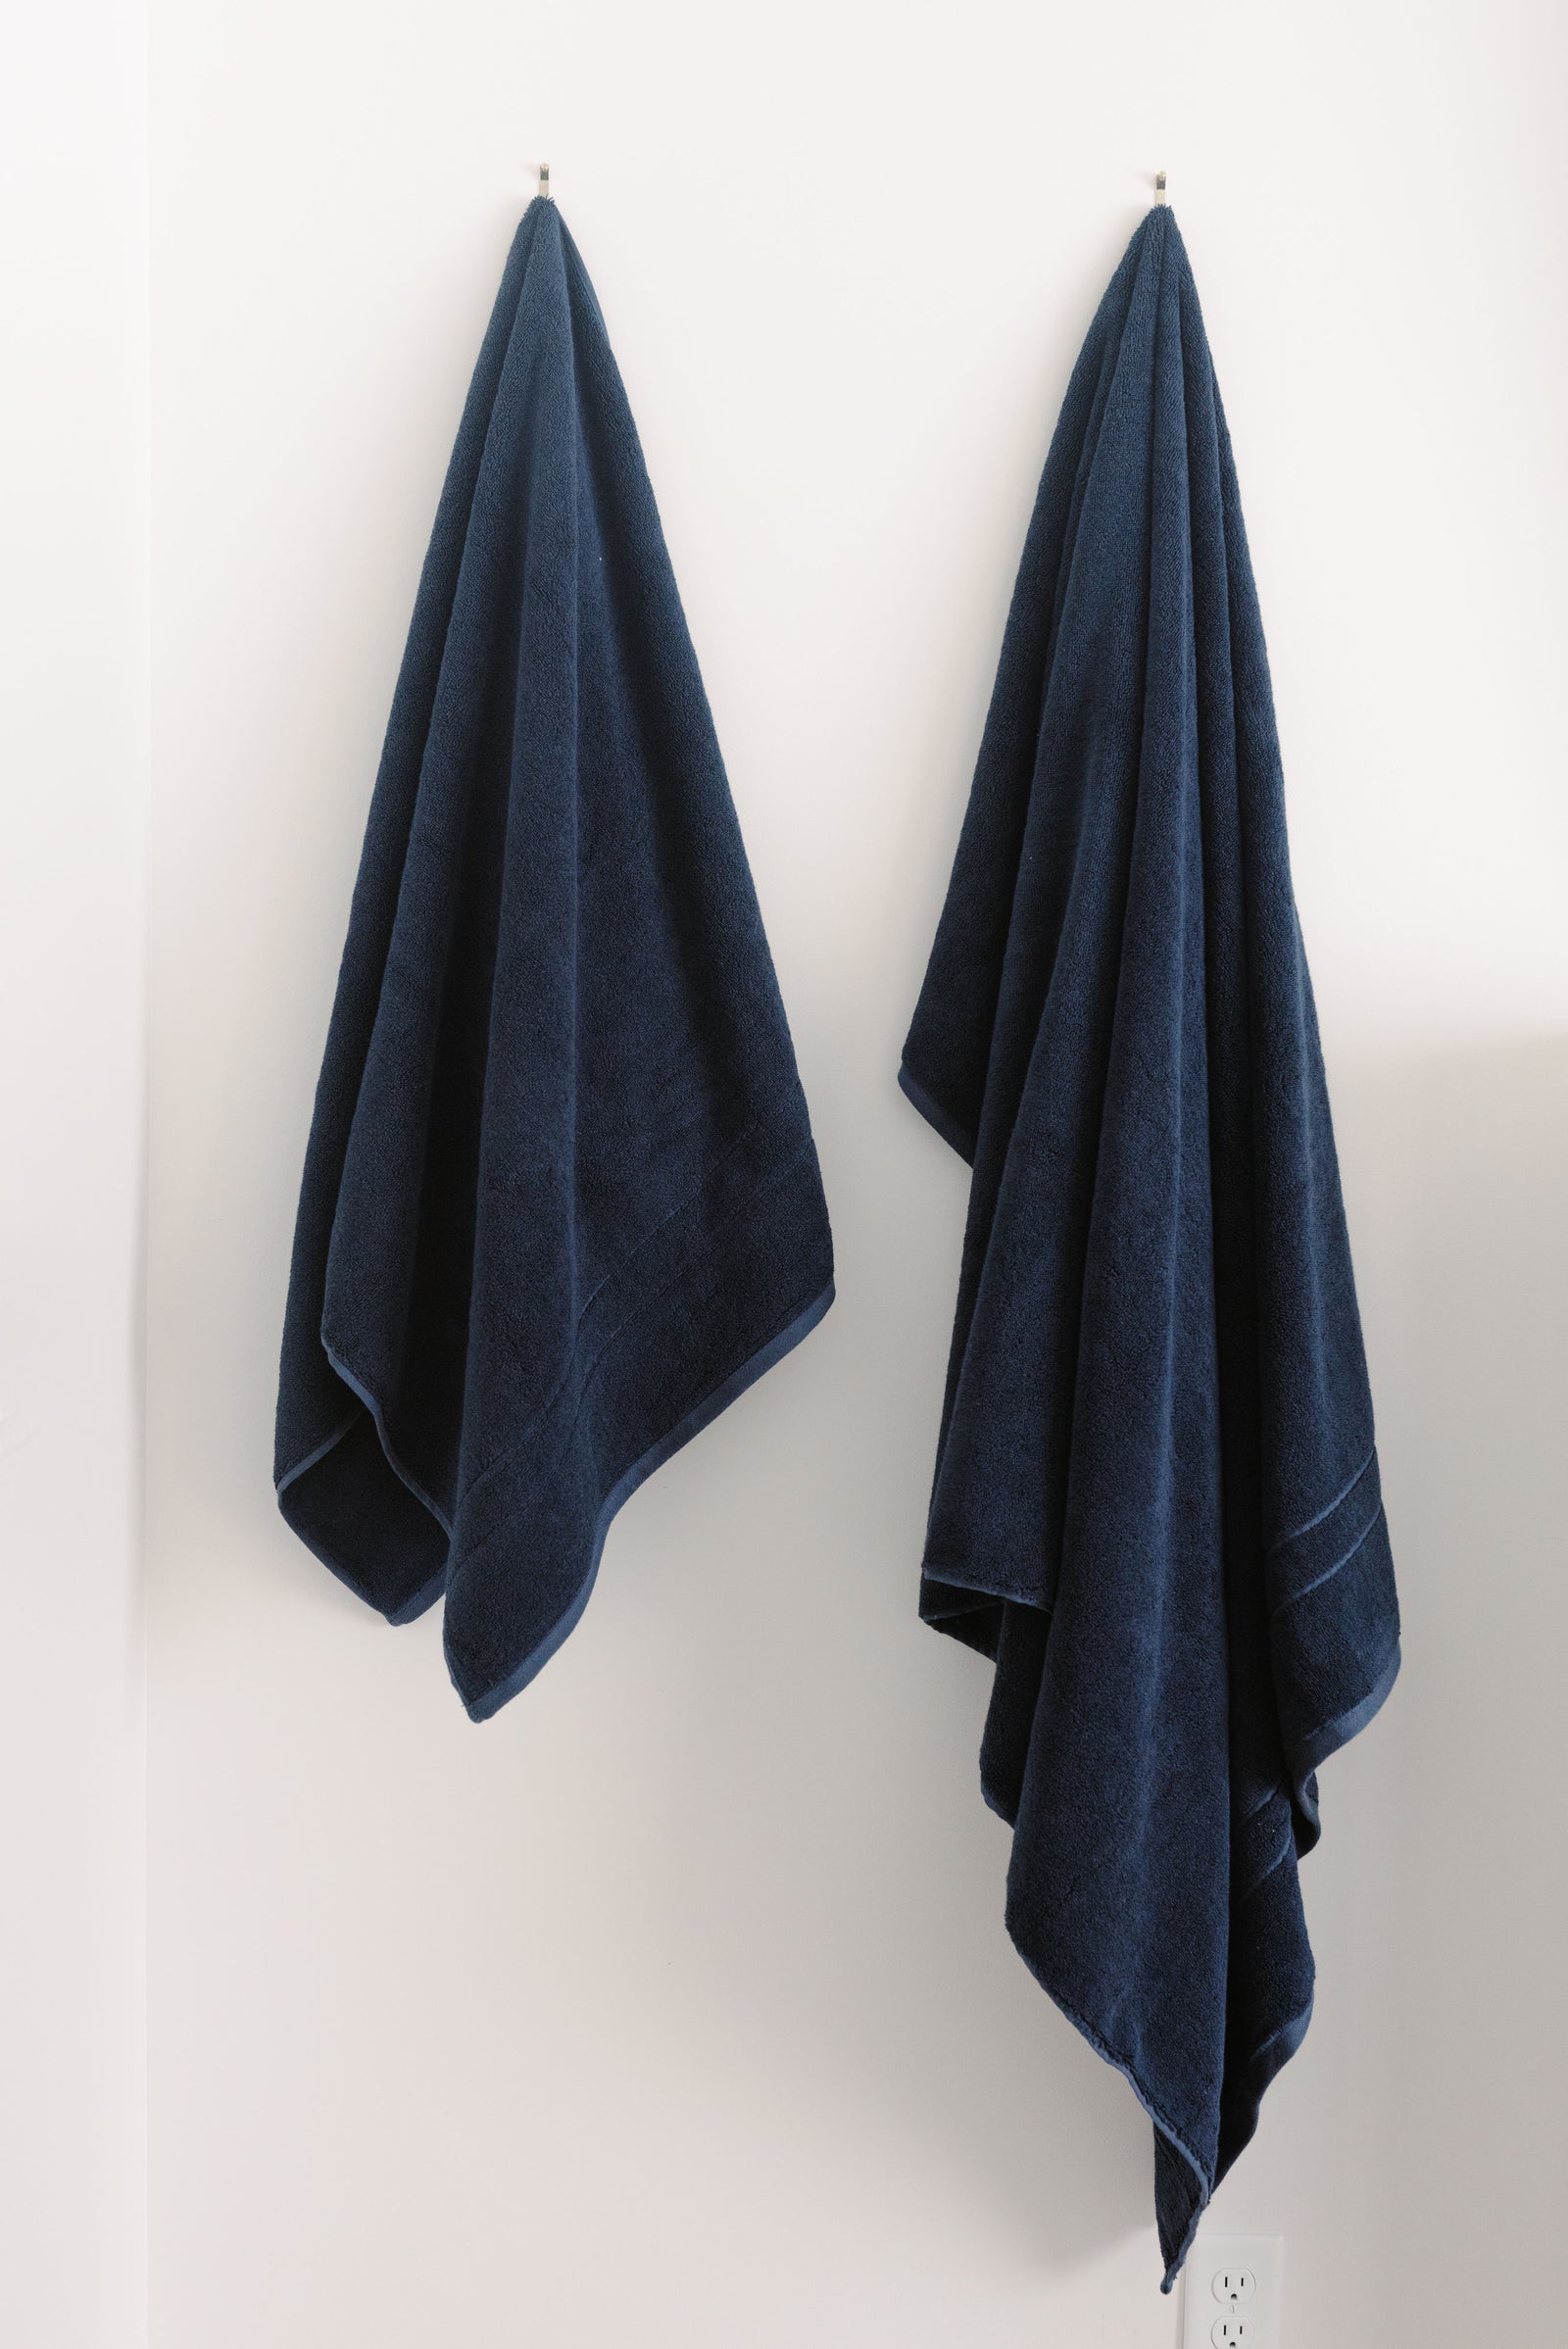 Premium Plush Bath Towels/sheets in the color dusk. Photo of Premium Plush Bath Towels taken in a bathroom showing the towels which are hung from a towel rack. 